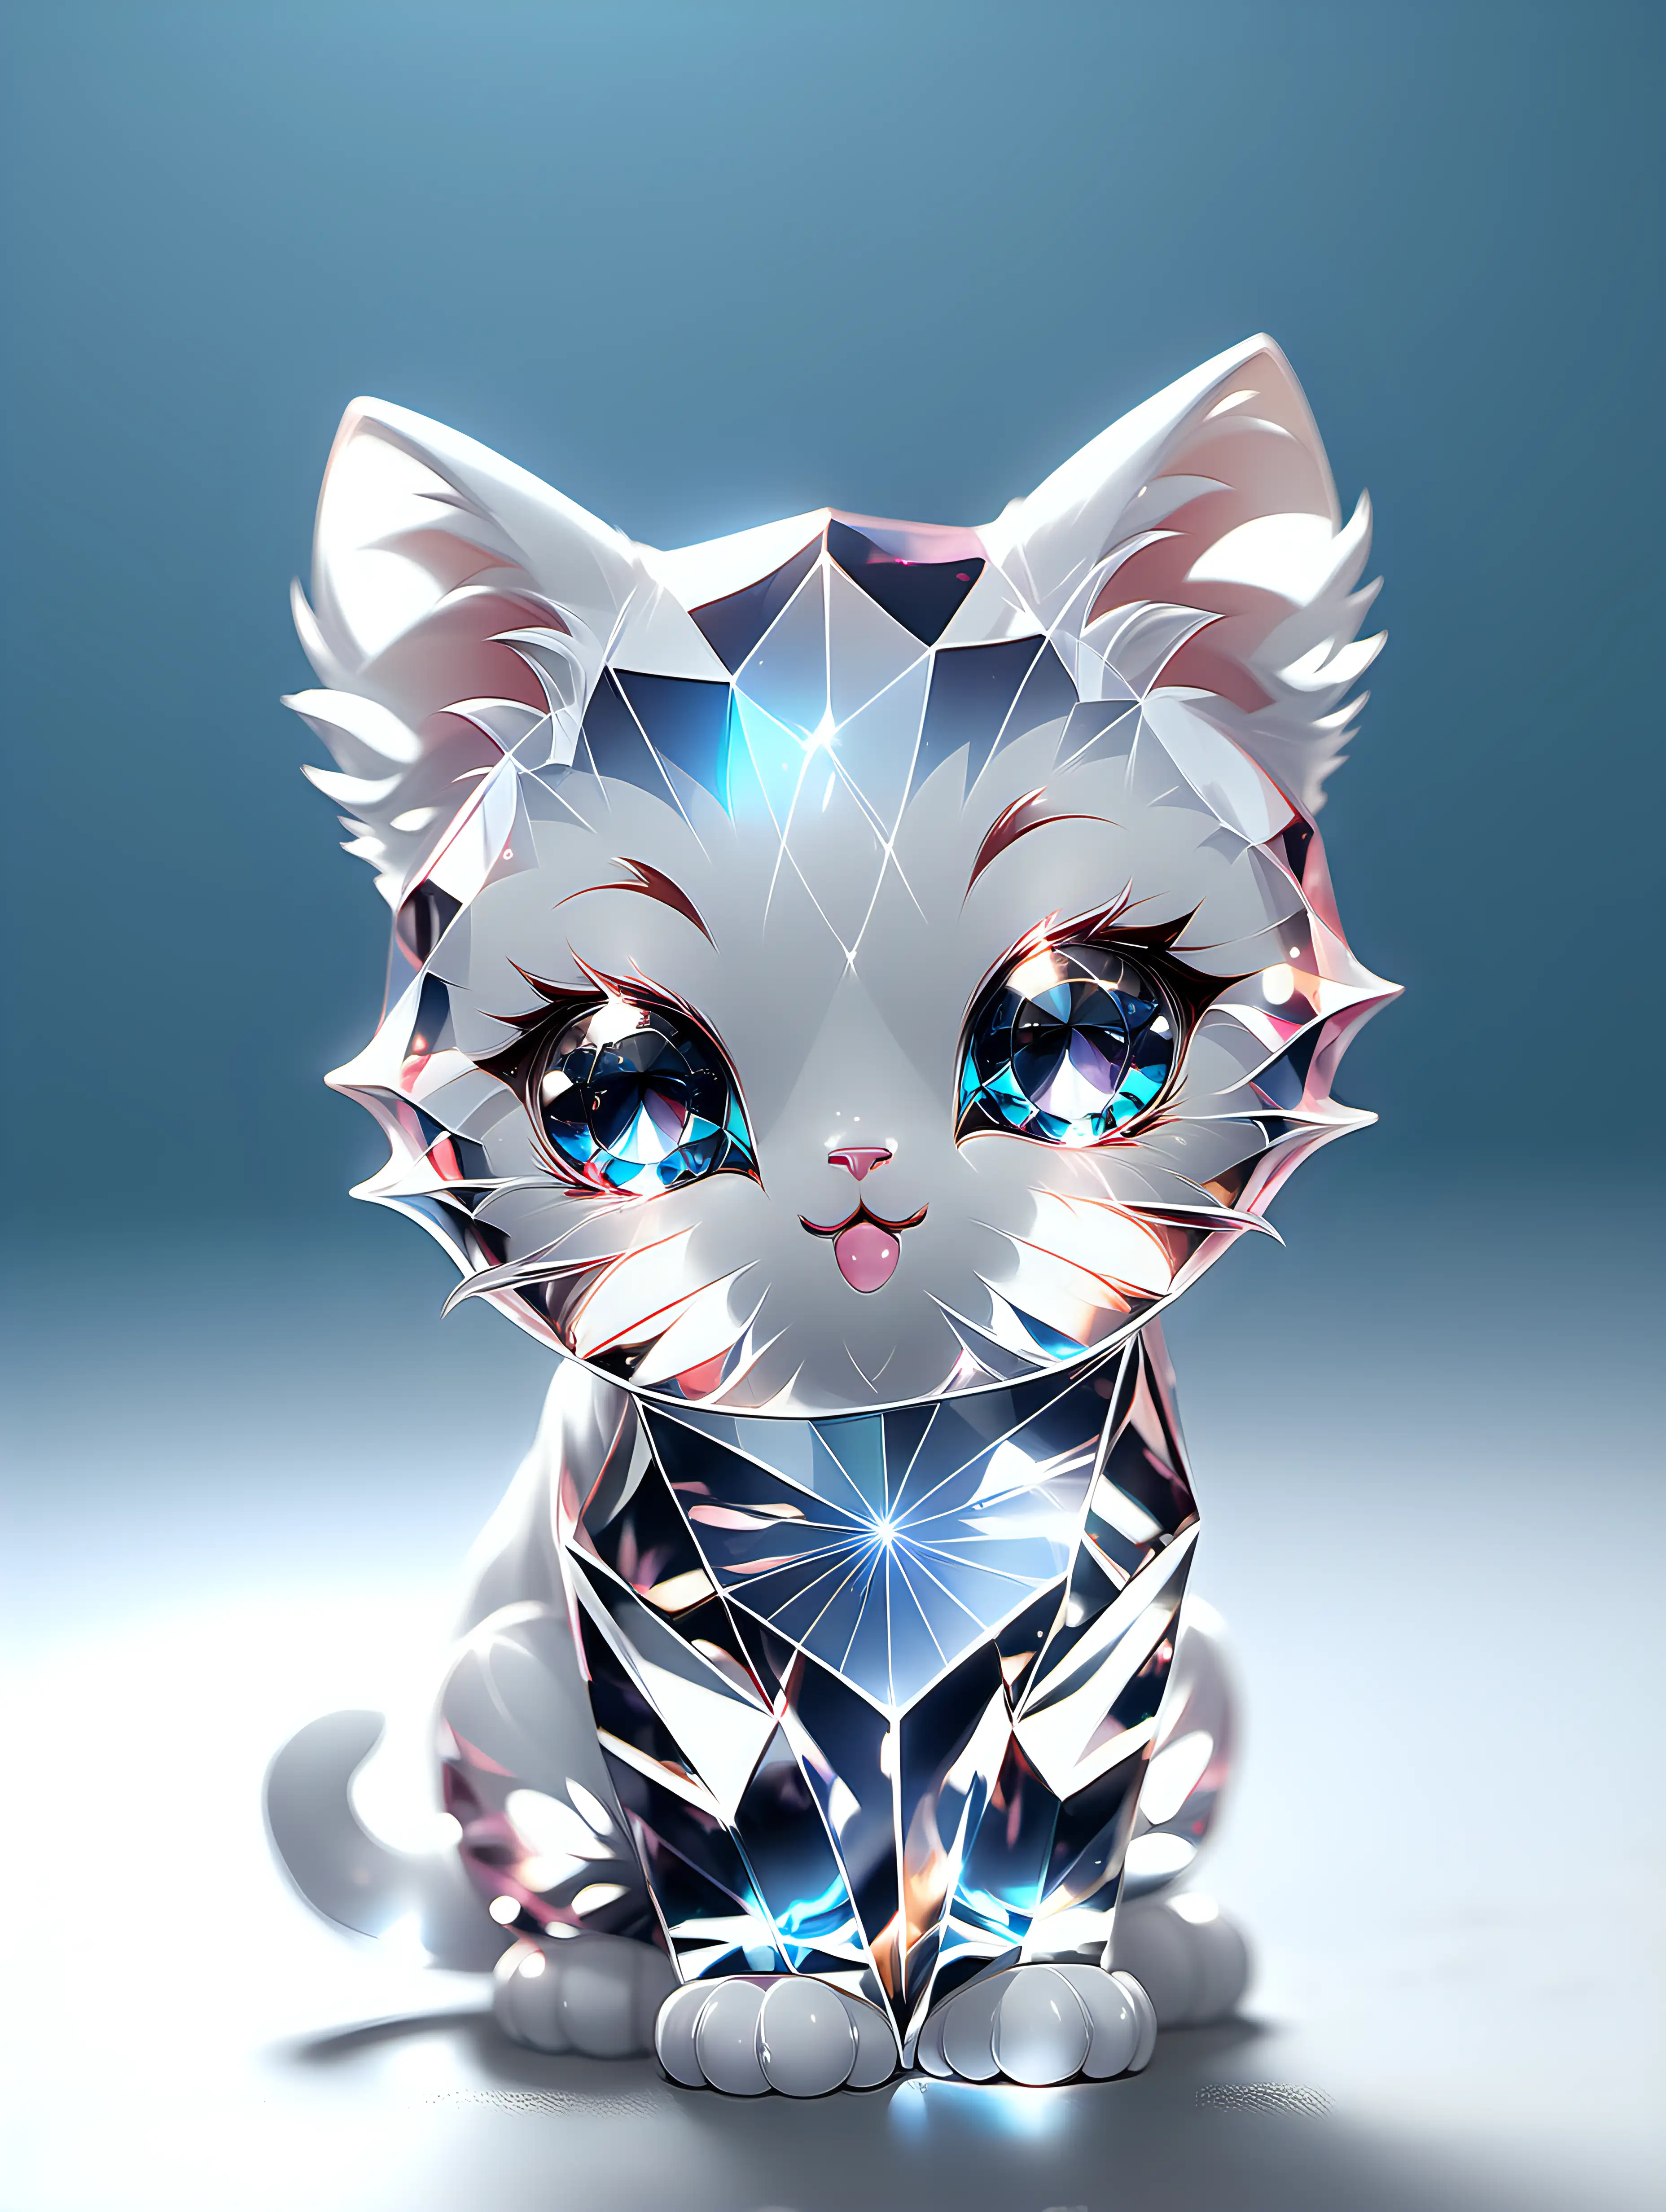 Adorable CrystalClear Background Cat Captivating Cute Kitty Imagery